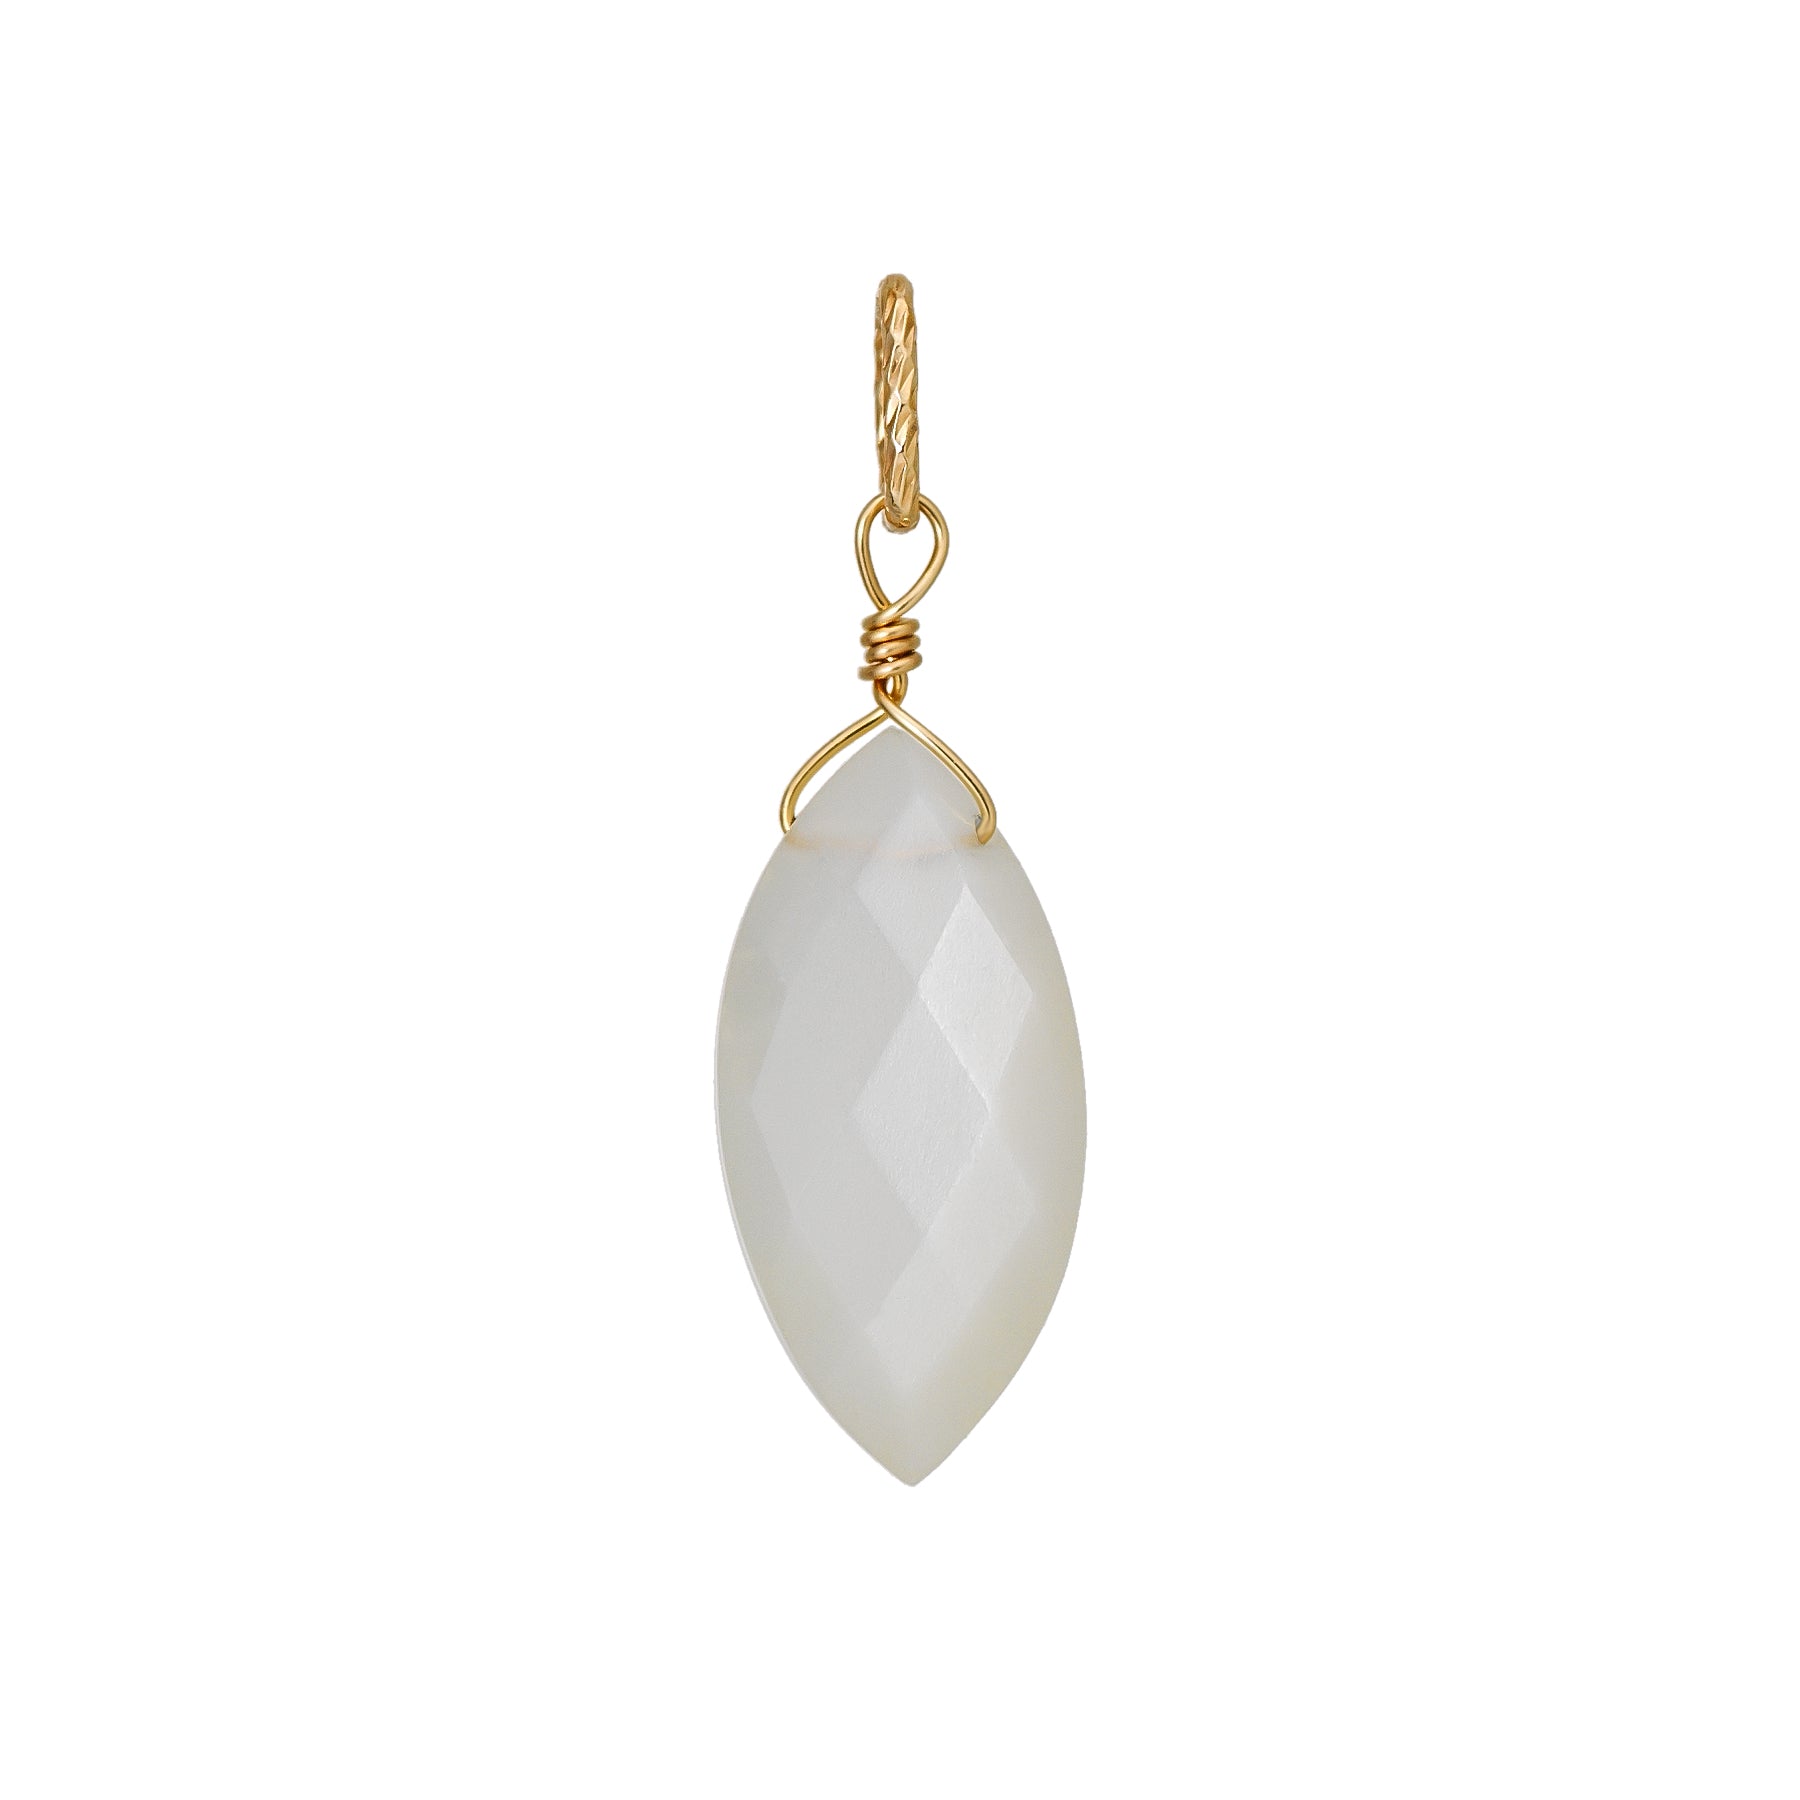 10K Moonstone Necklace Charm (Yellow Gold) - Product Image